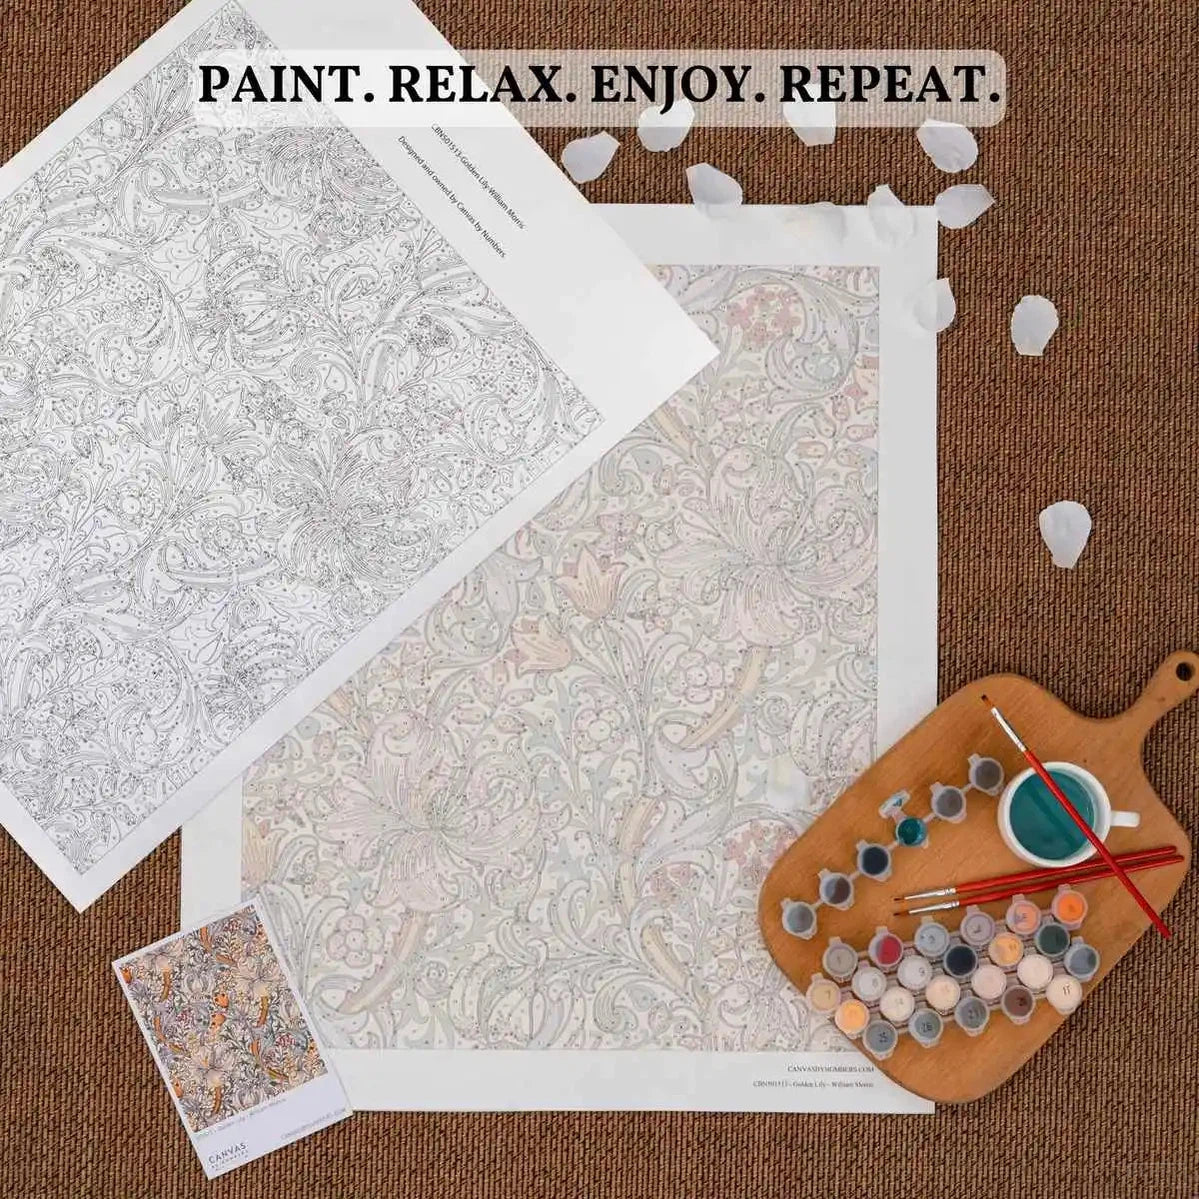 Barn Pals - Paint by Numbers-Enjoy painting by numbers this cute countryside scene! If you love farm animals, nothing beats Barn Pals by Jenny Newland. Exclusive to Canvas by Numbers.-Canvas by Numbers